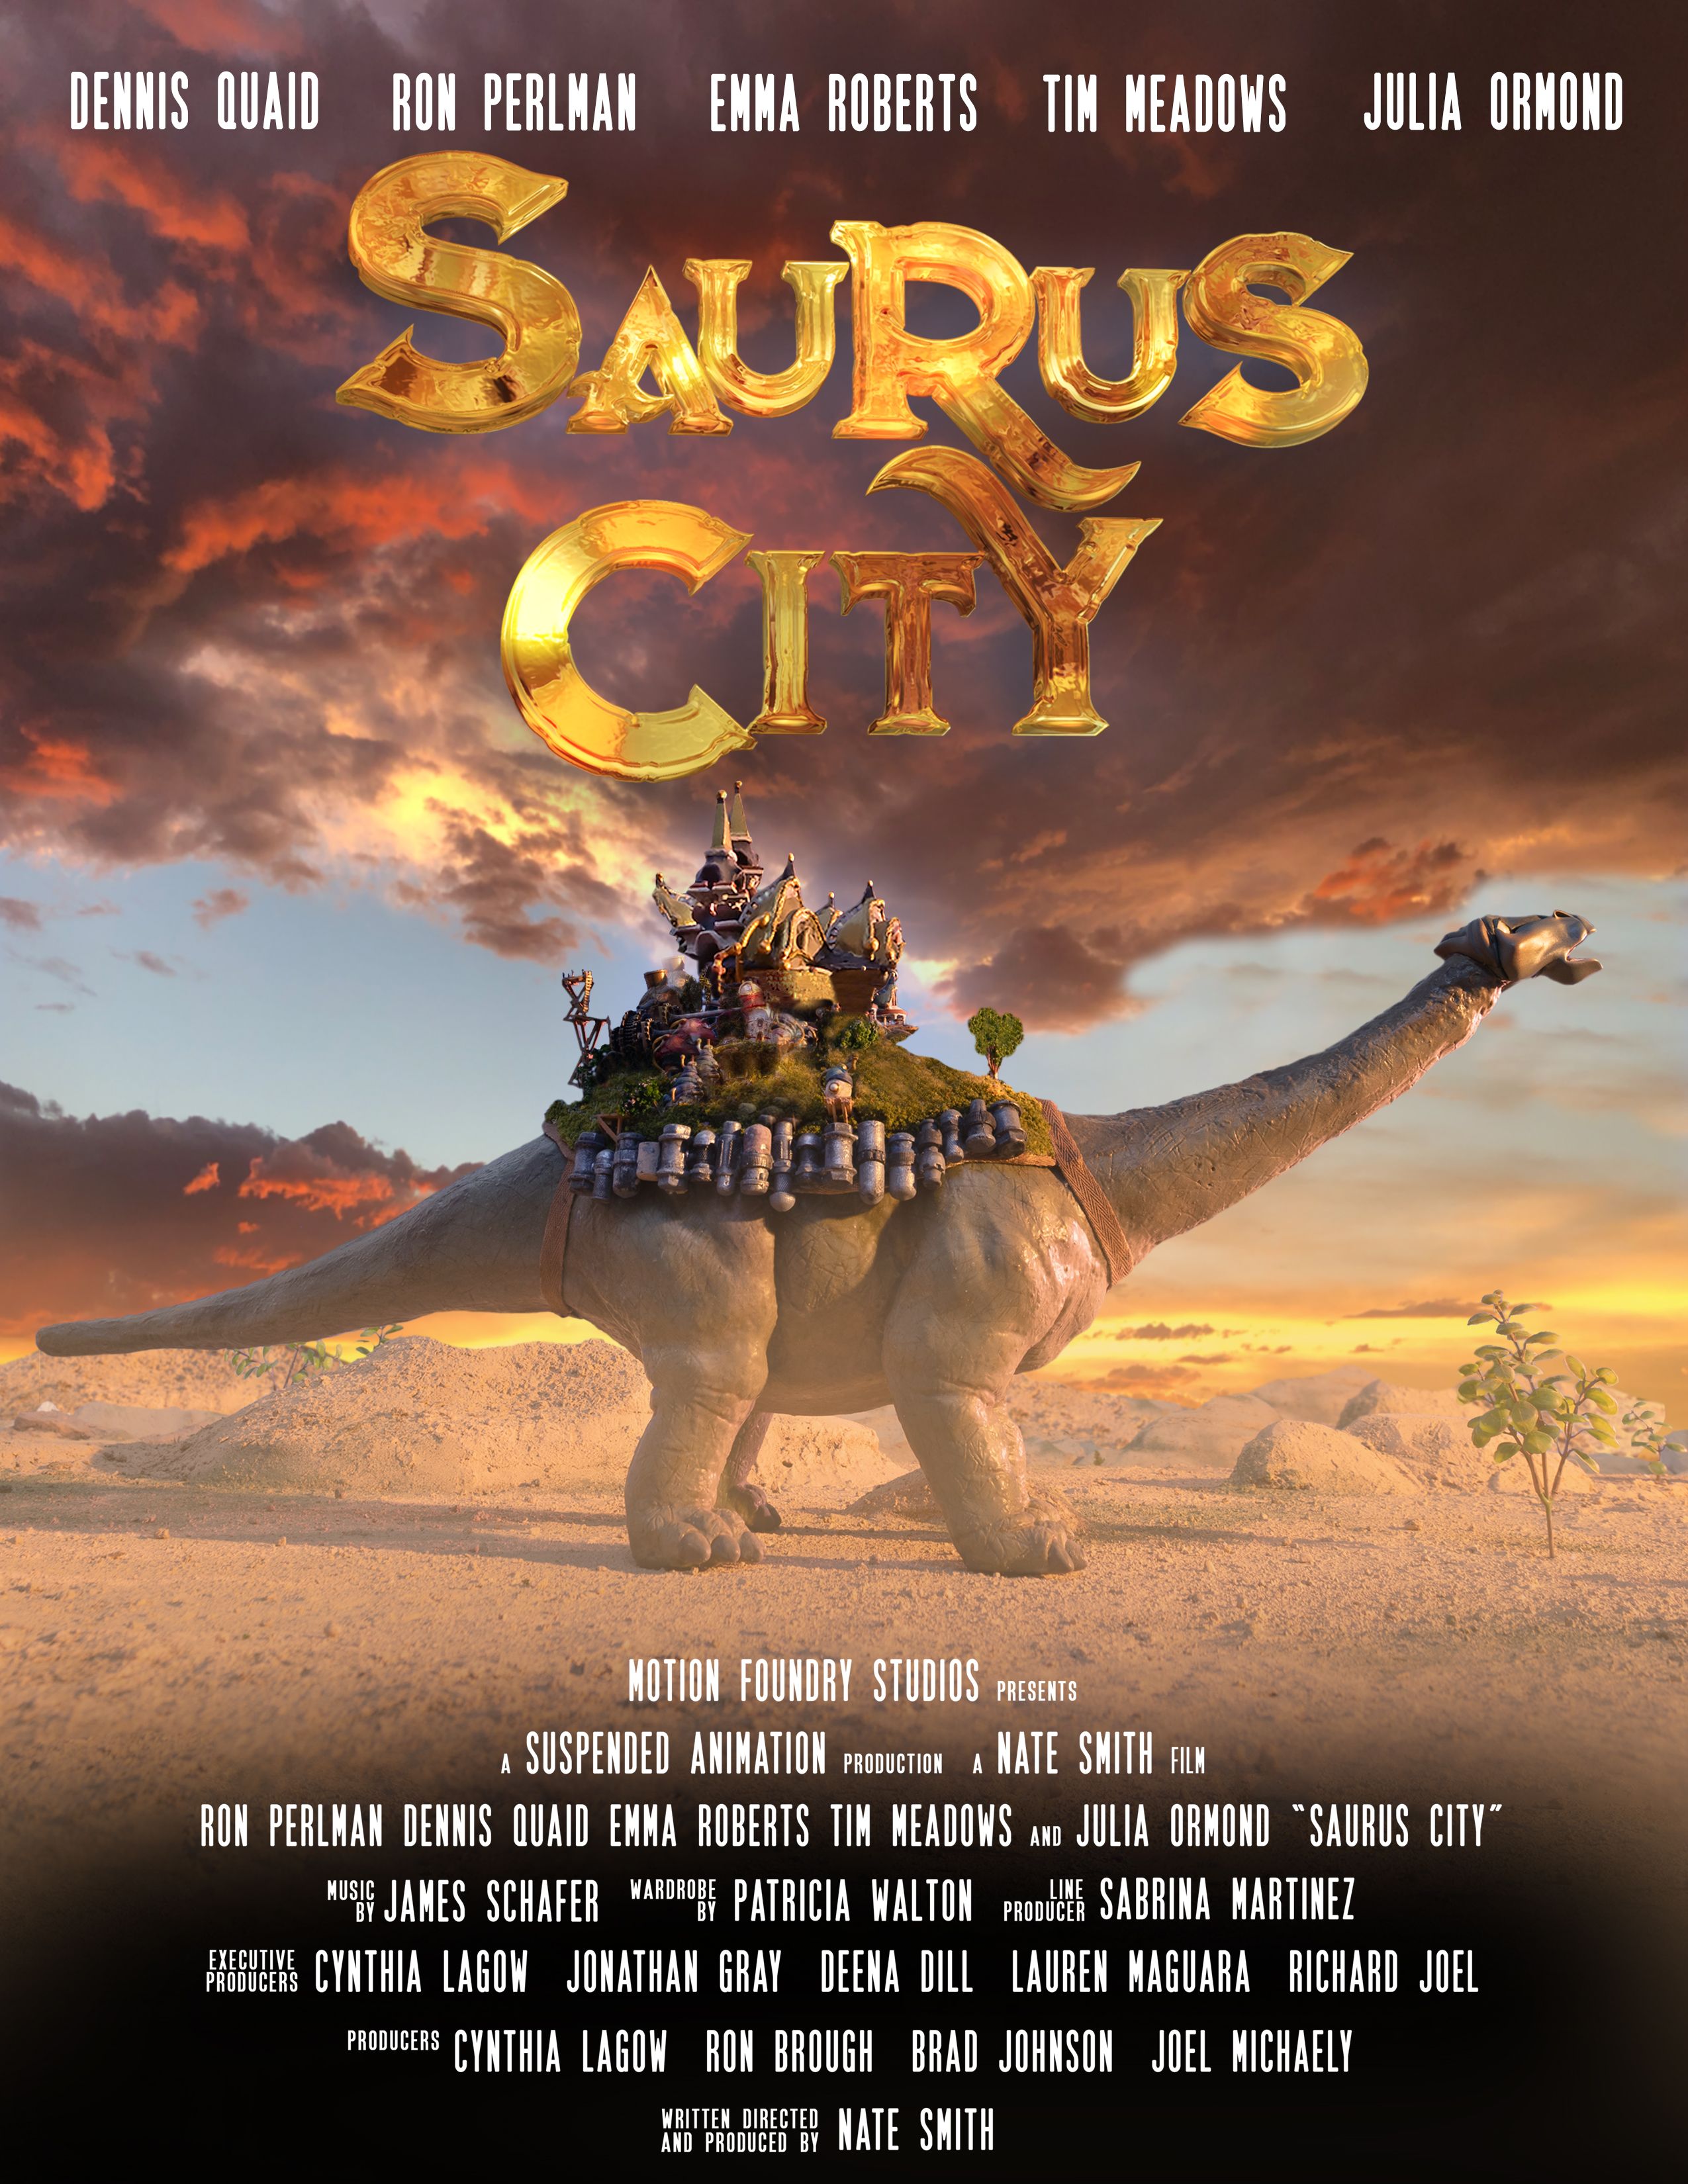 The movie poster for Saurus City showing a village on the back of a dinosaur